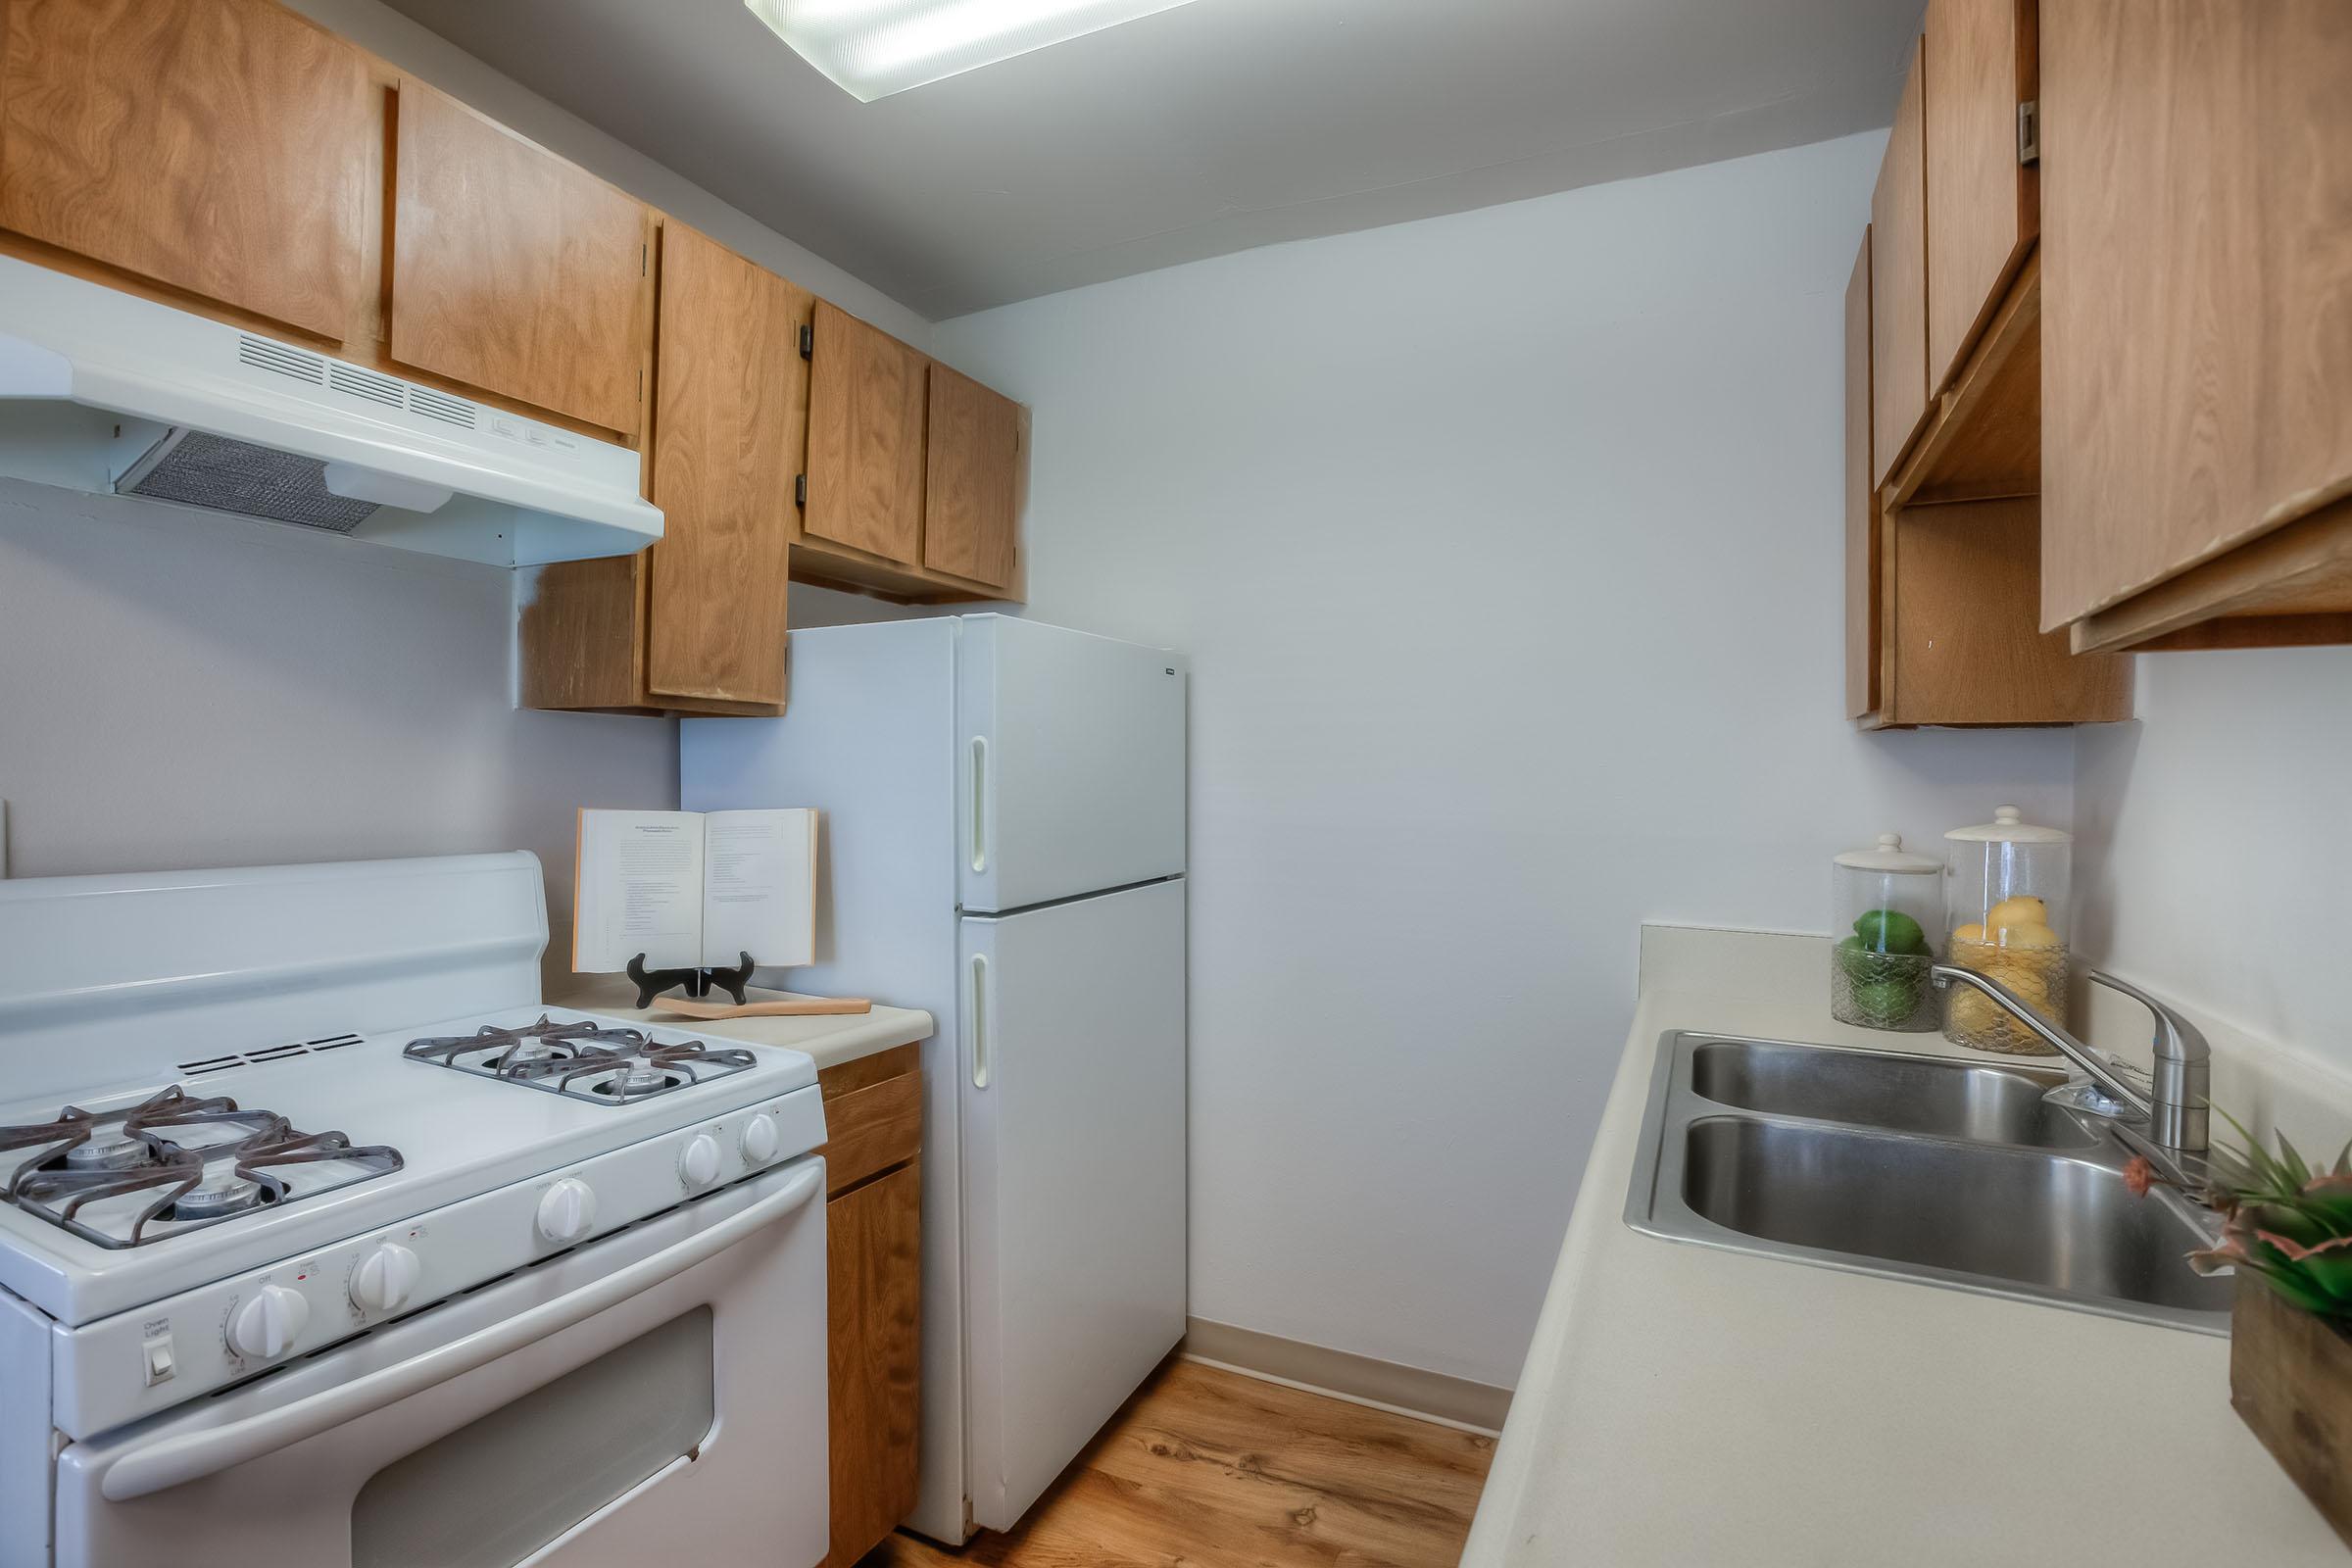 TWO AND THREE BEDROOM APARTMENTS FOR RENT IN BREMERTON, WA